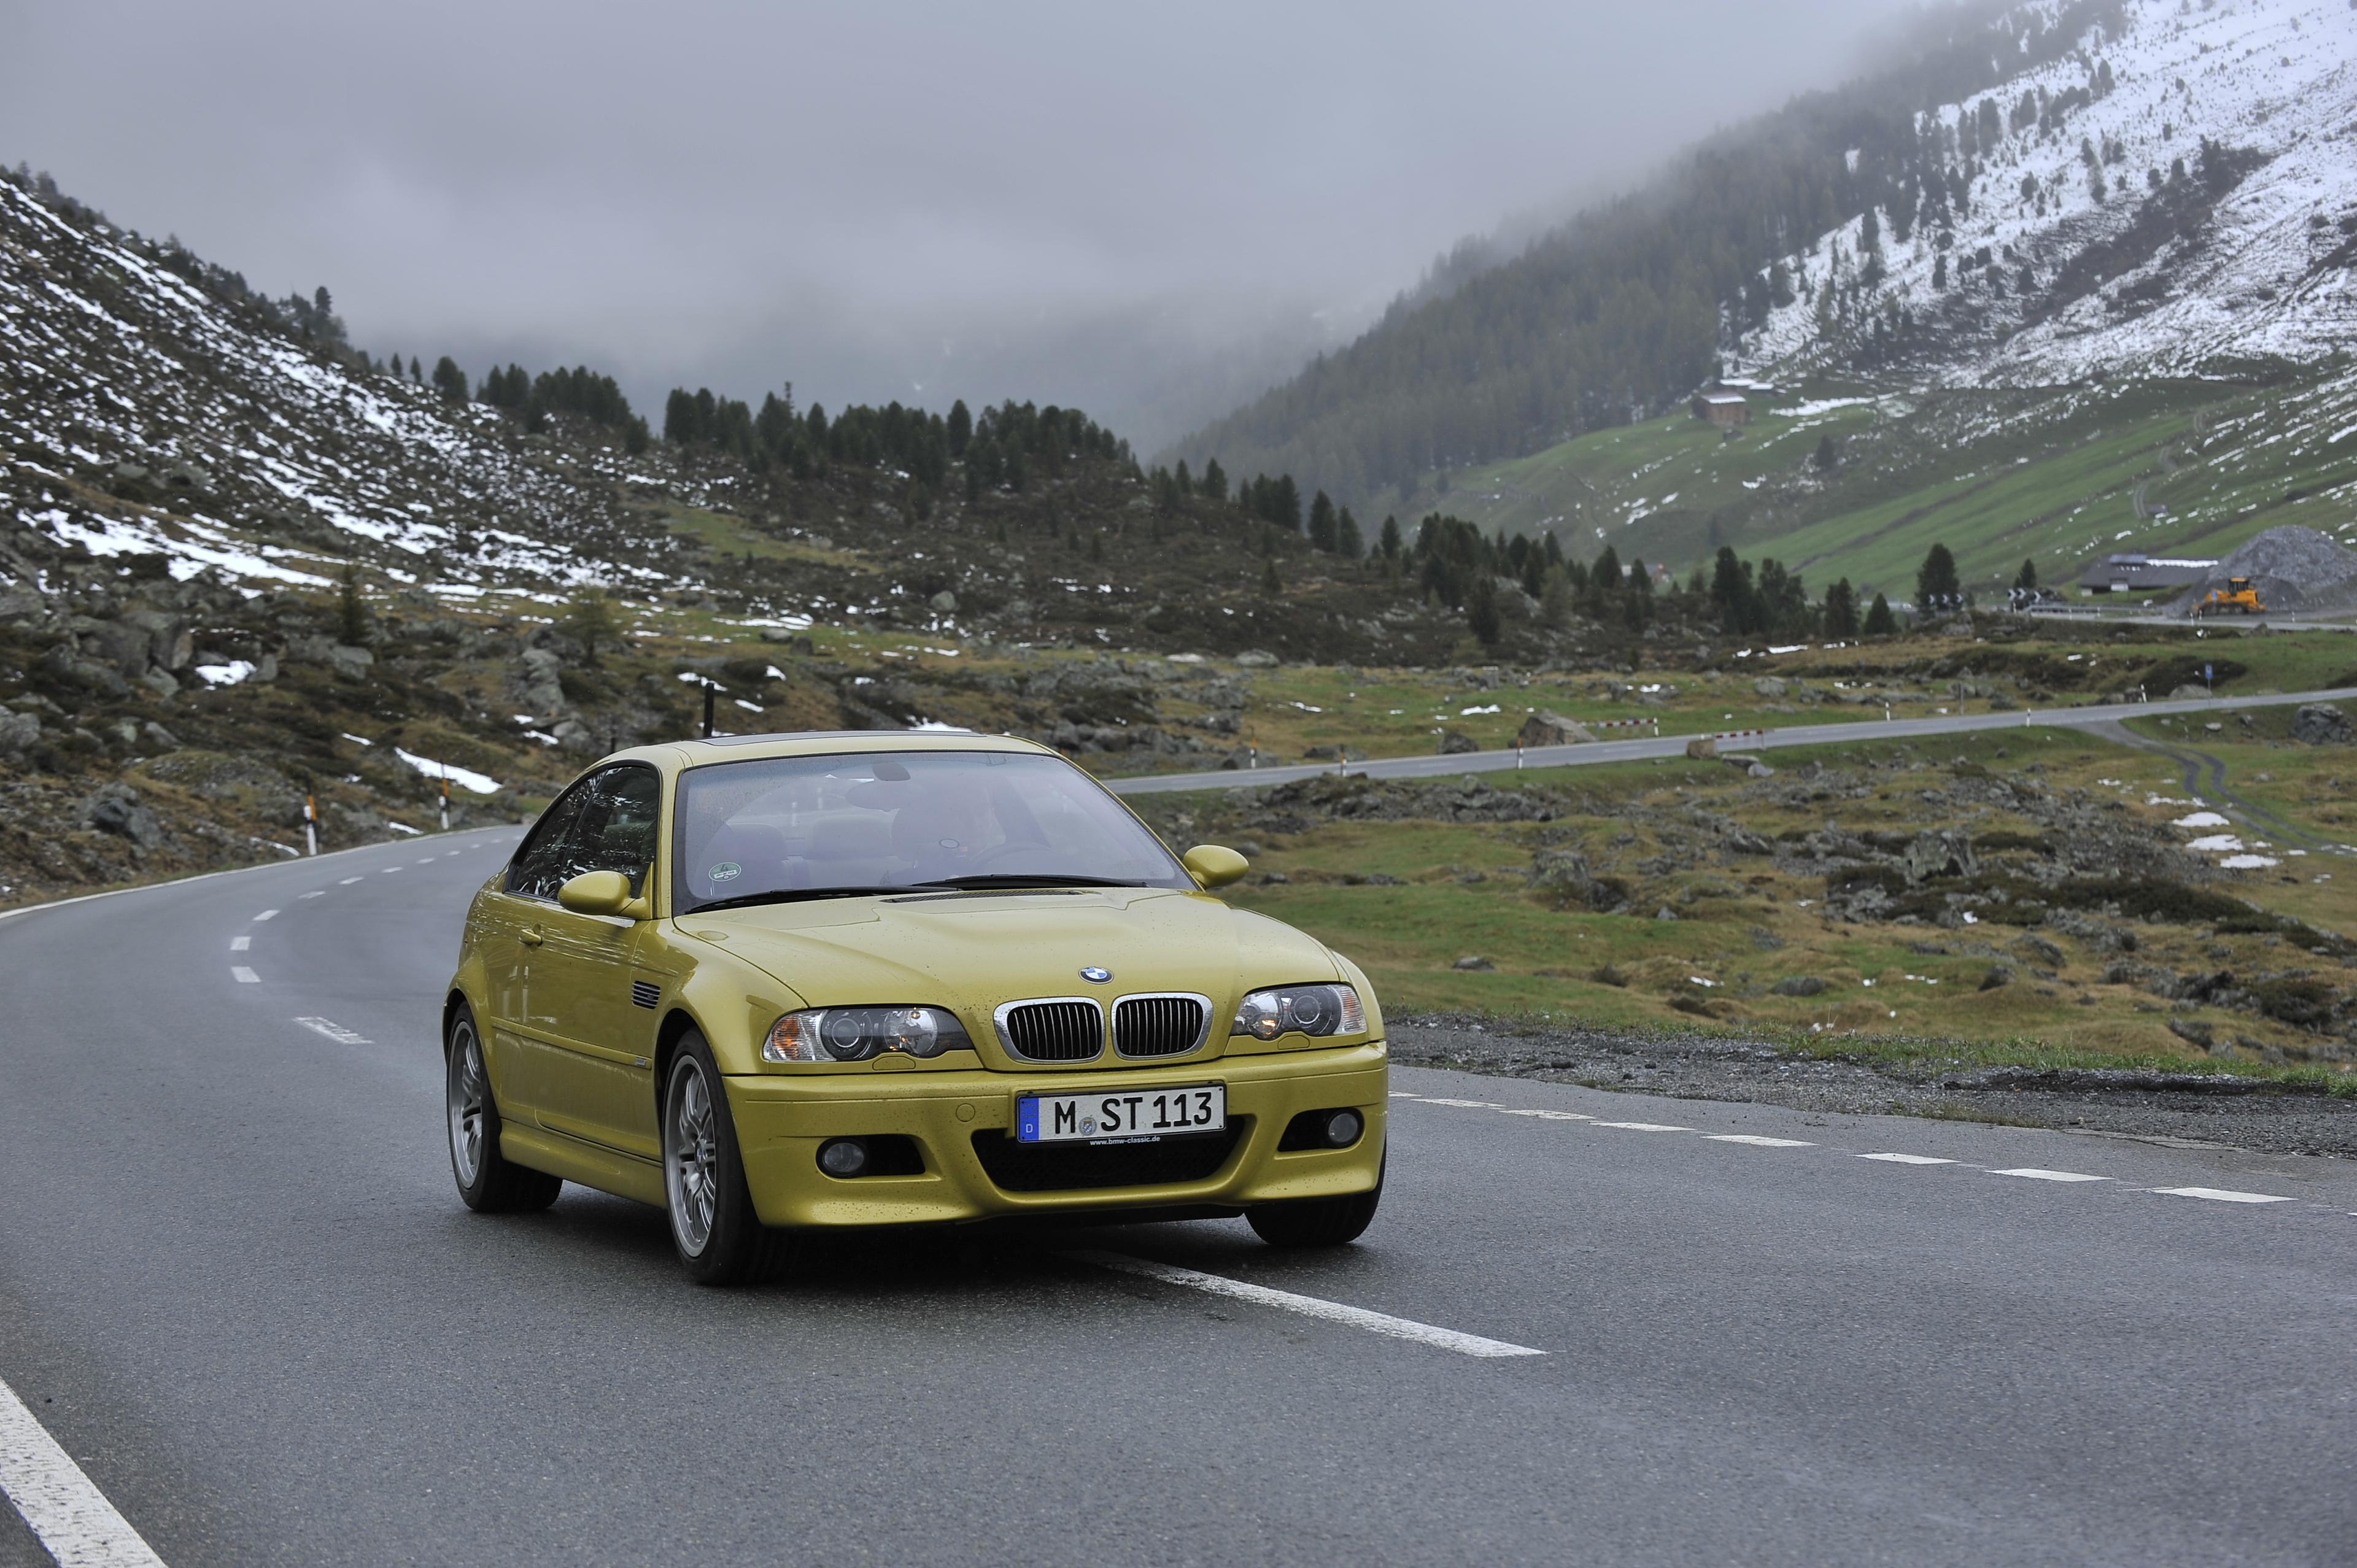 Image of a BMW E46 M3 from the BMW USA newsroom.